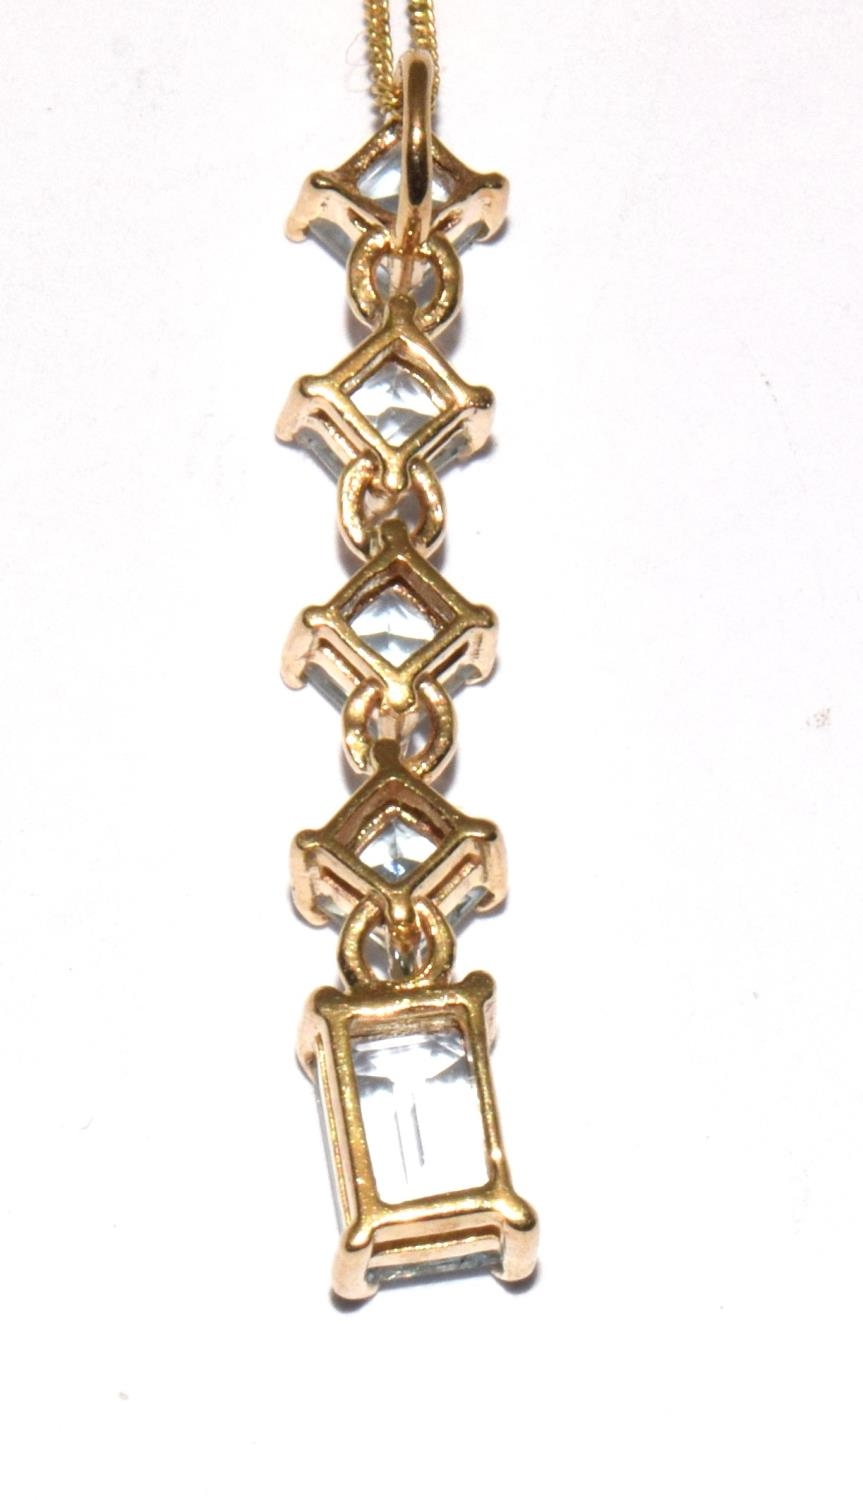 9ct gold 5 stone drop Aquamarine pendant necklace with chain 40cm - Image 6 of 7